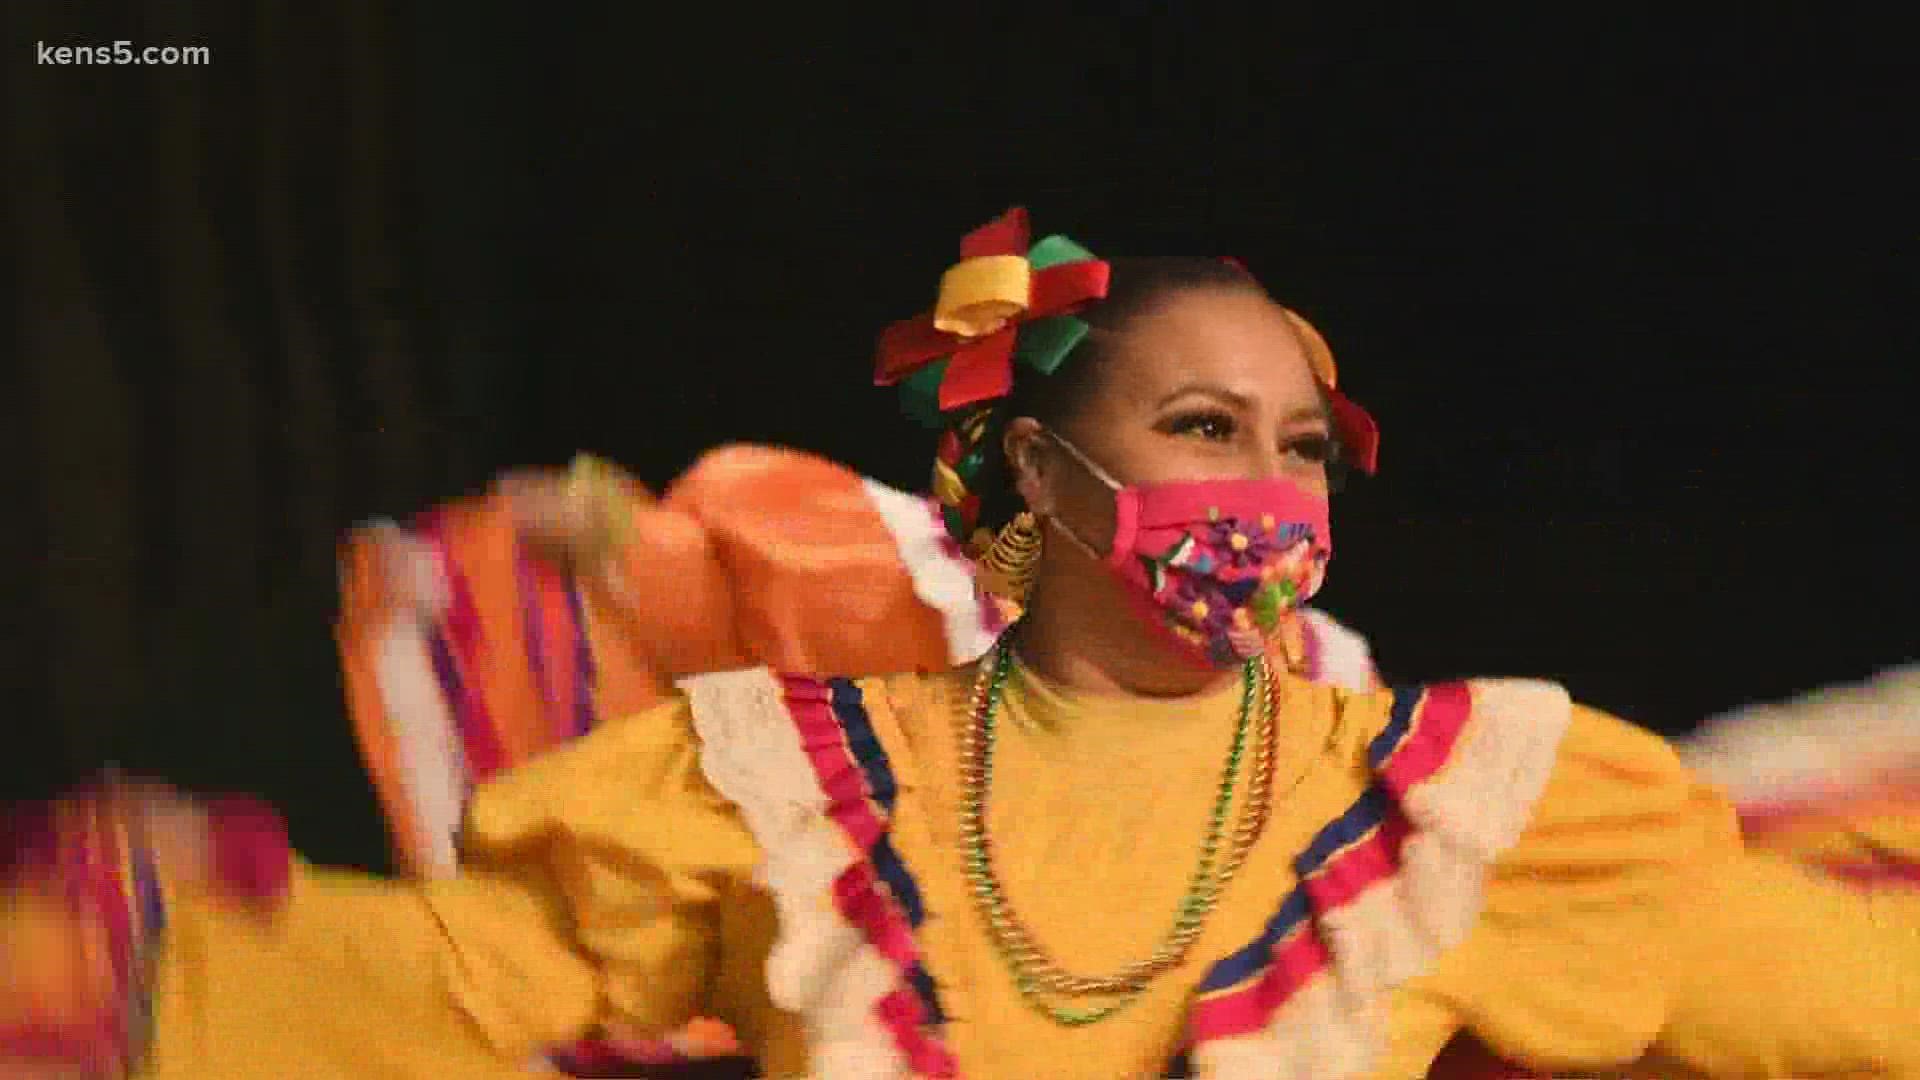 The city has both virtual and in-person events scheduled as four weeks of celebrating Hispanic heritage kicks off.